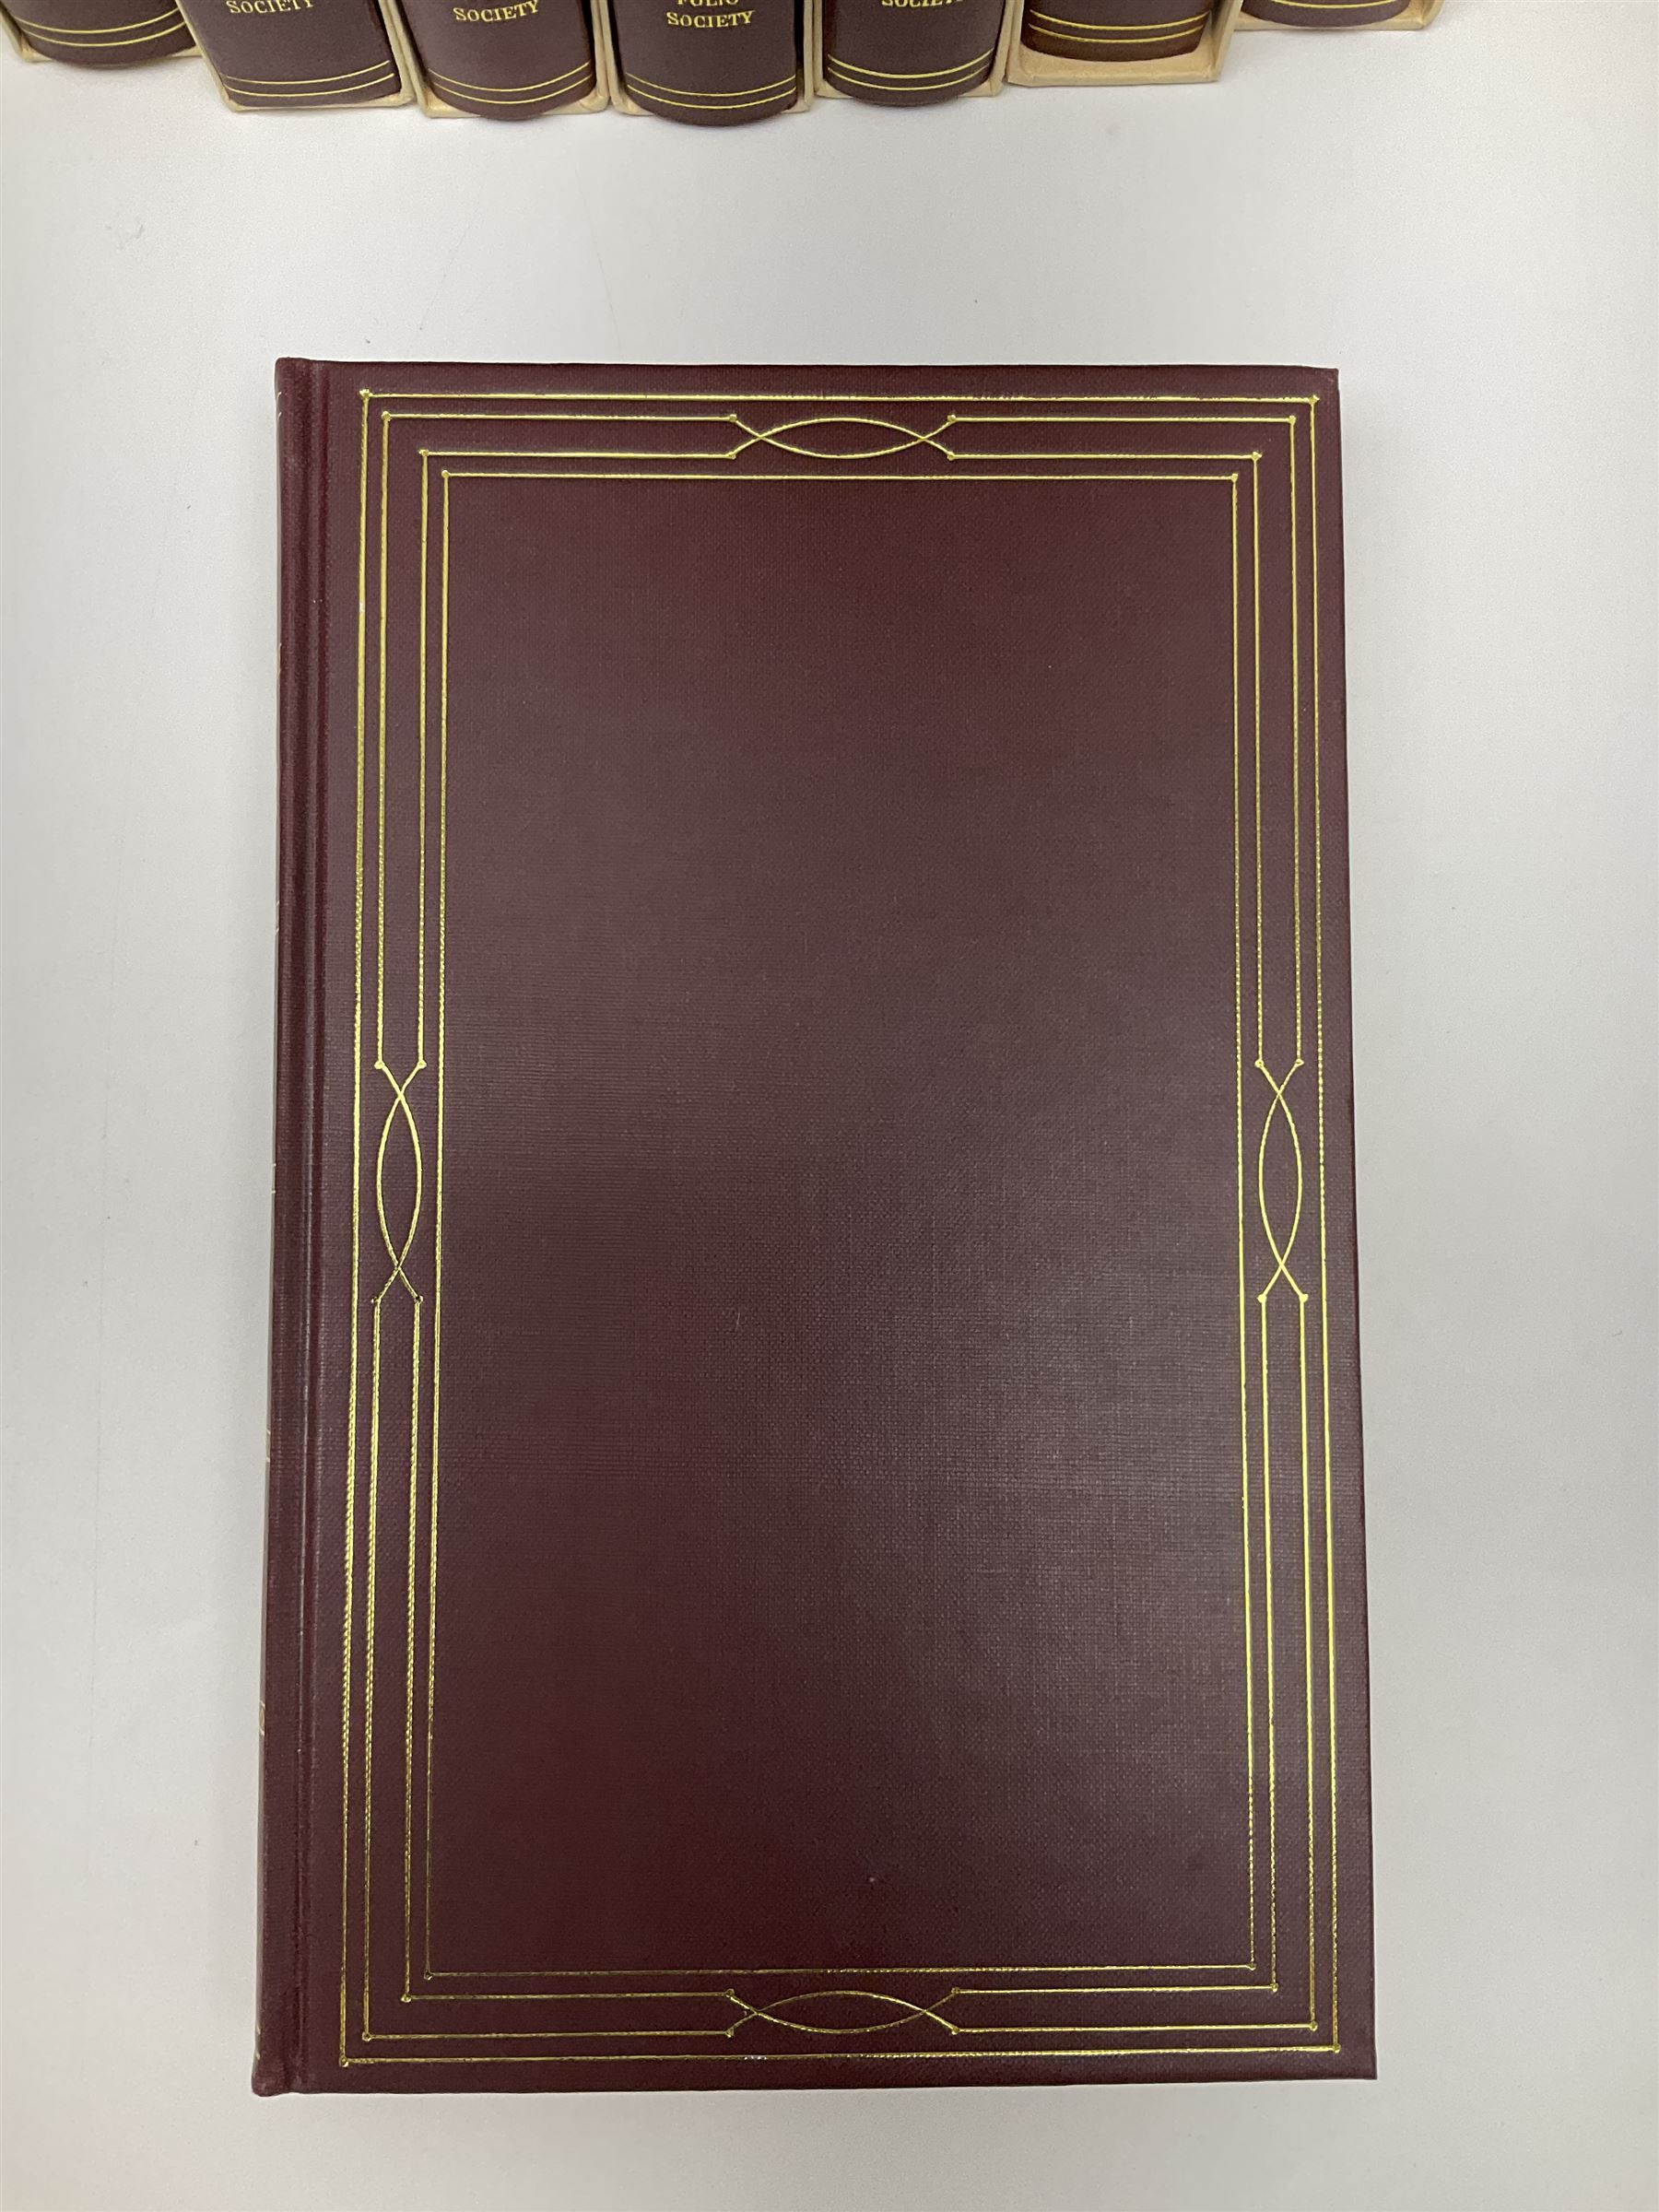 Folio Society - eighteen volumes including The History of the Decline and Fall of the Roman Empire - Image 4 of 16